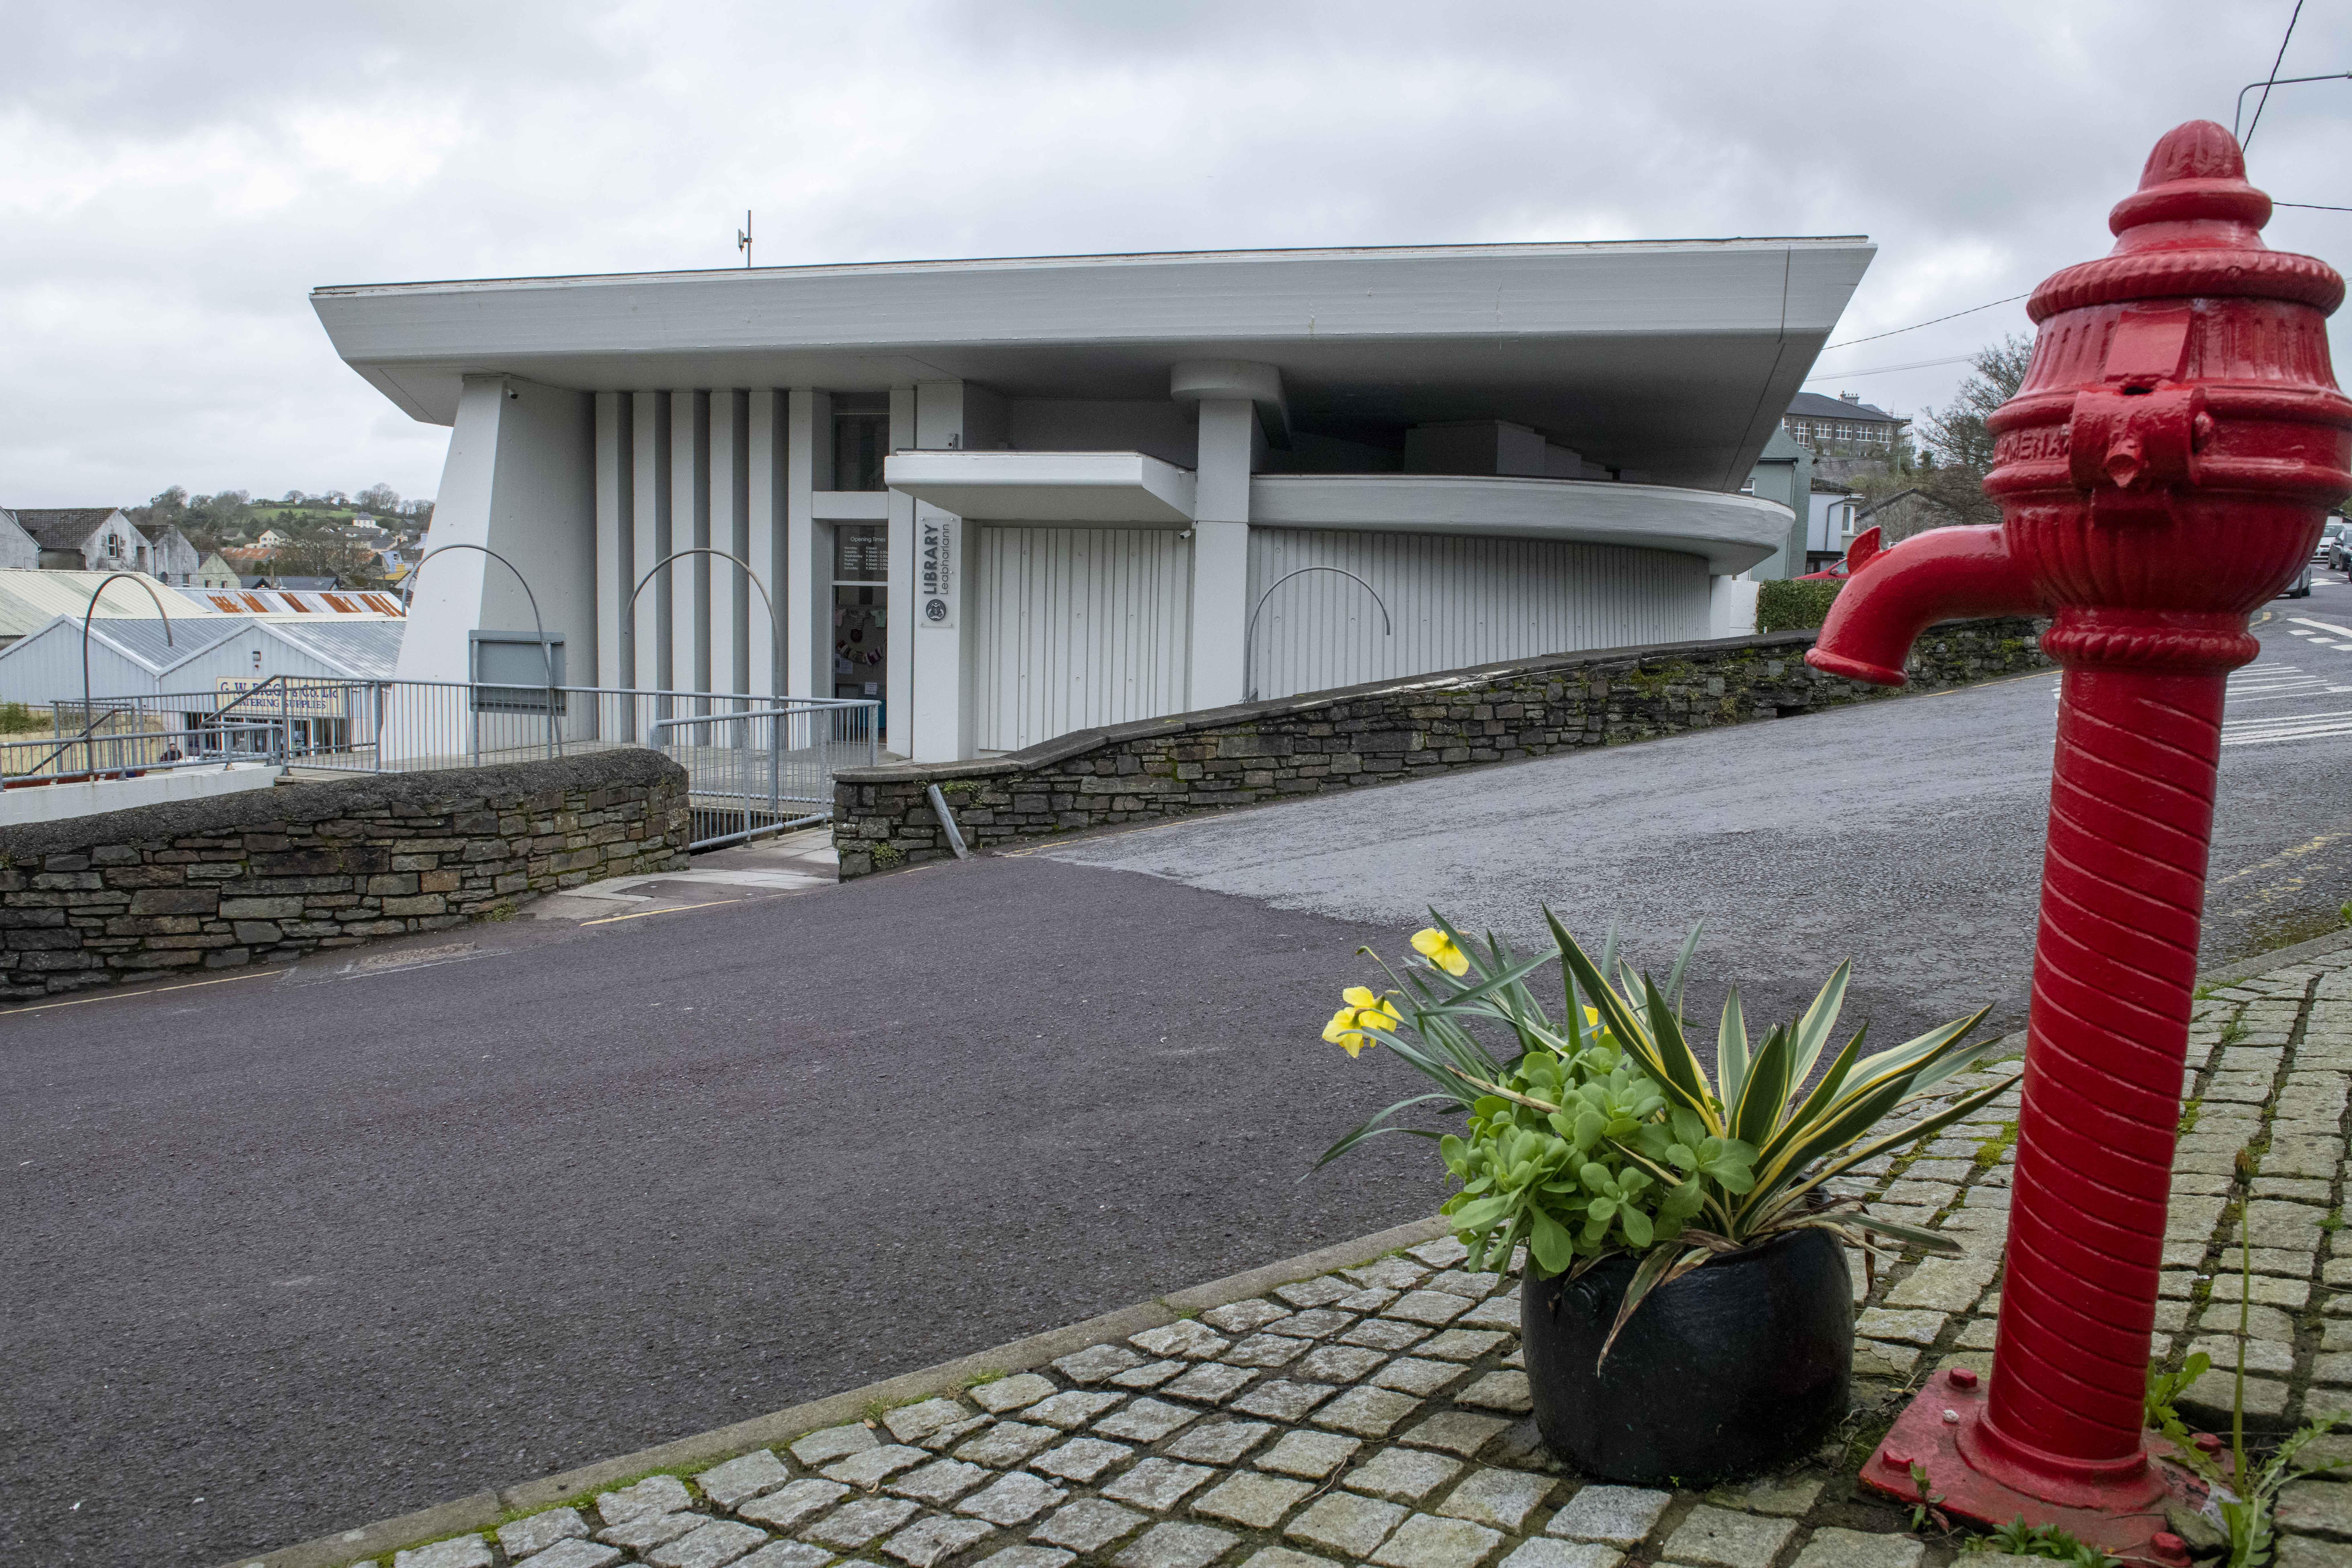 Cork County Council is delighted to announce the launch of a new book on the history of Bantry Library to coincide with the building’s 50th anniversary. Bantry Library first opened to the public in 1974 and is of considerable historical significance from a town and architectural perspective.  